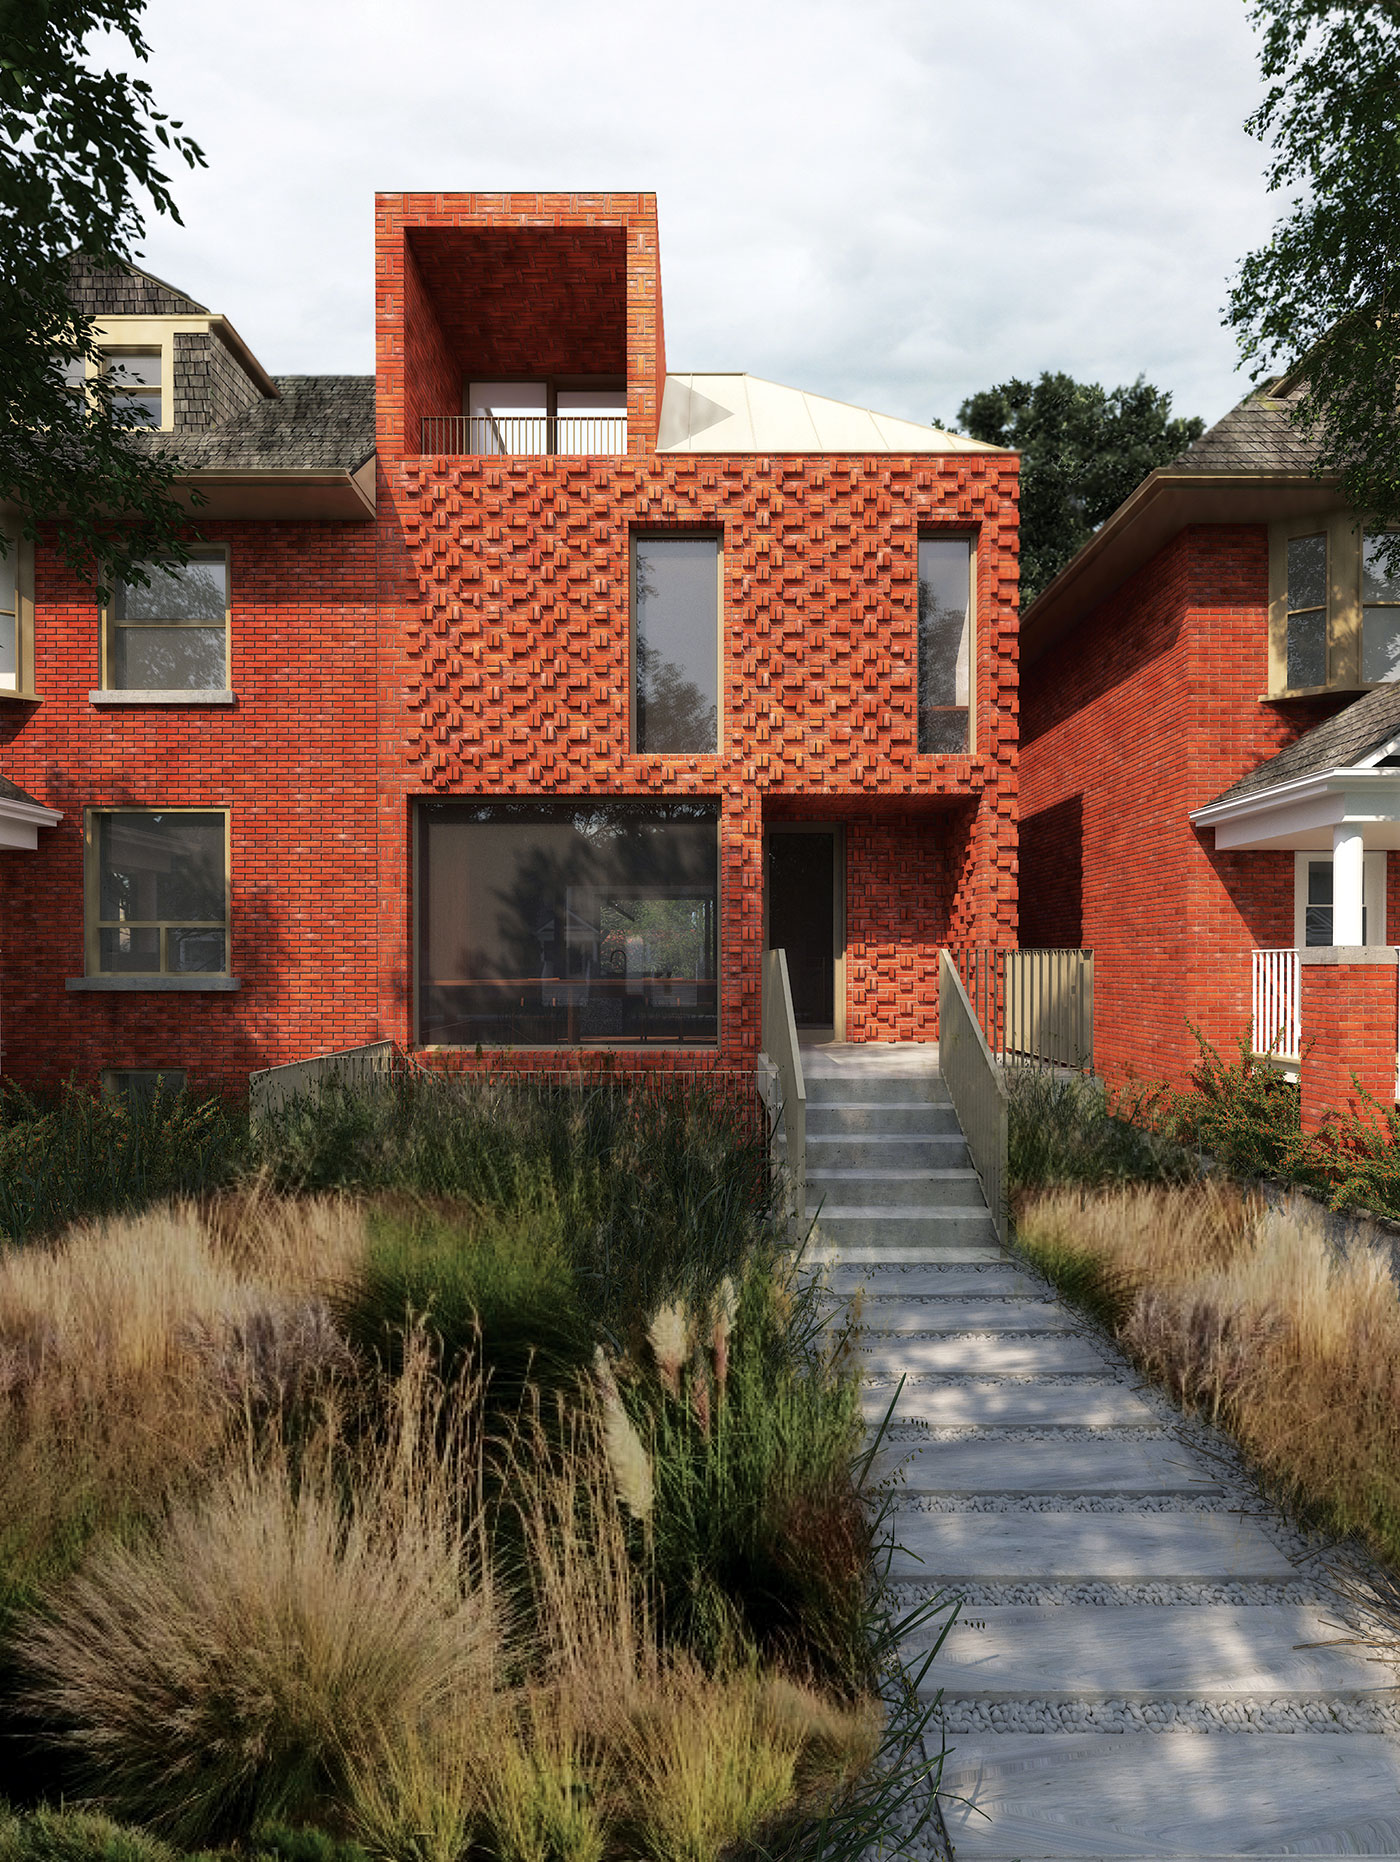 The Rosedale case study creates a contemporary brick form that fits into the streetscape.